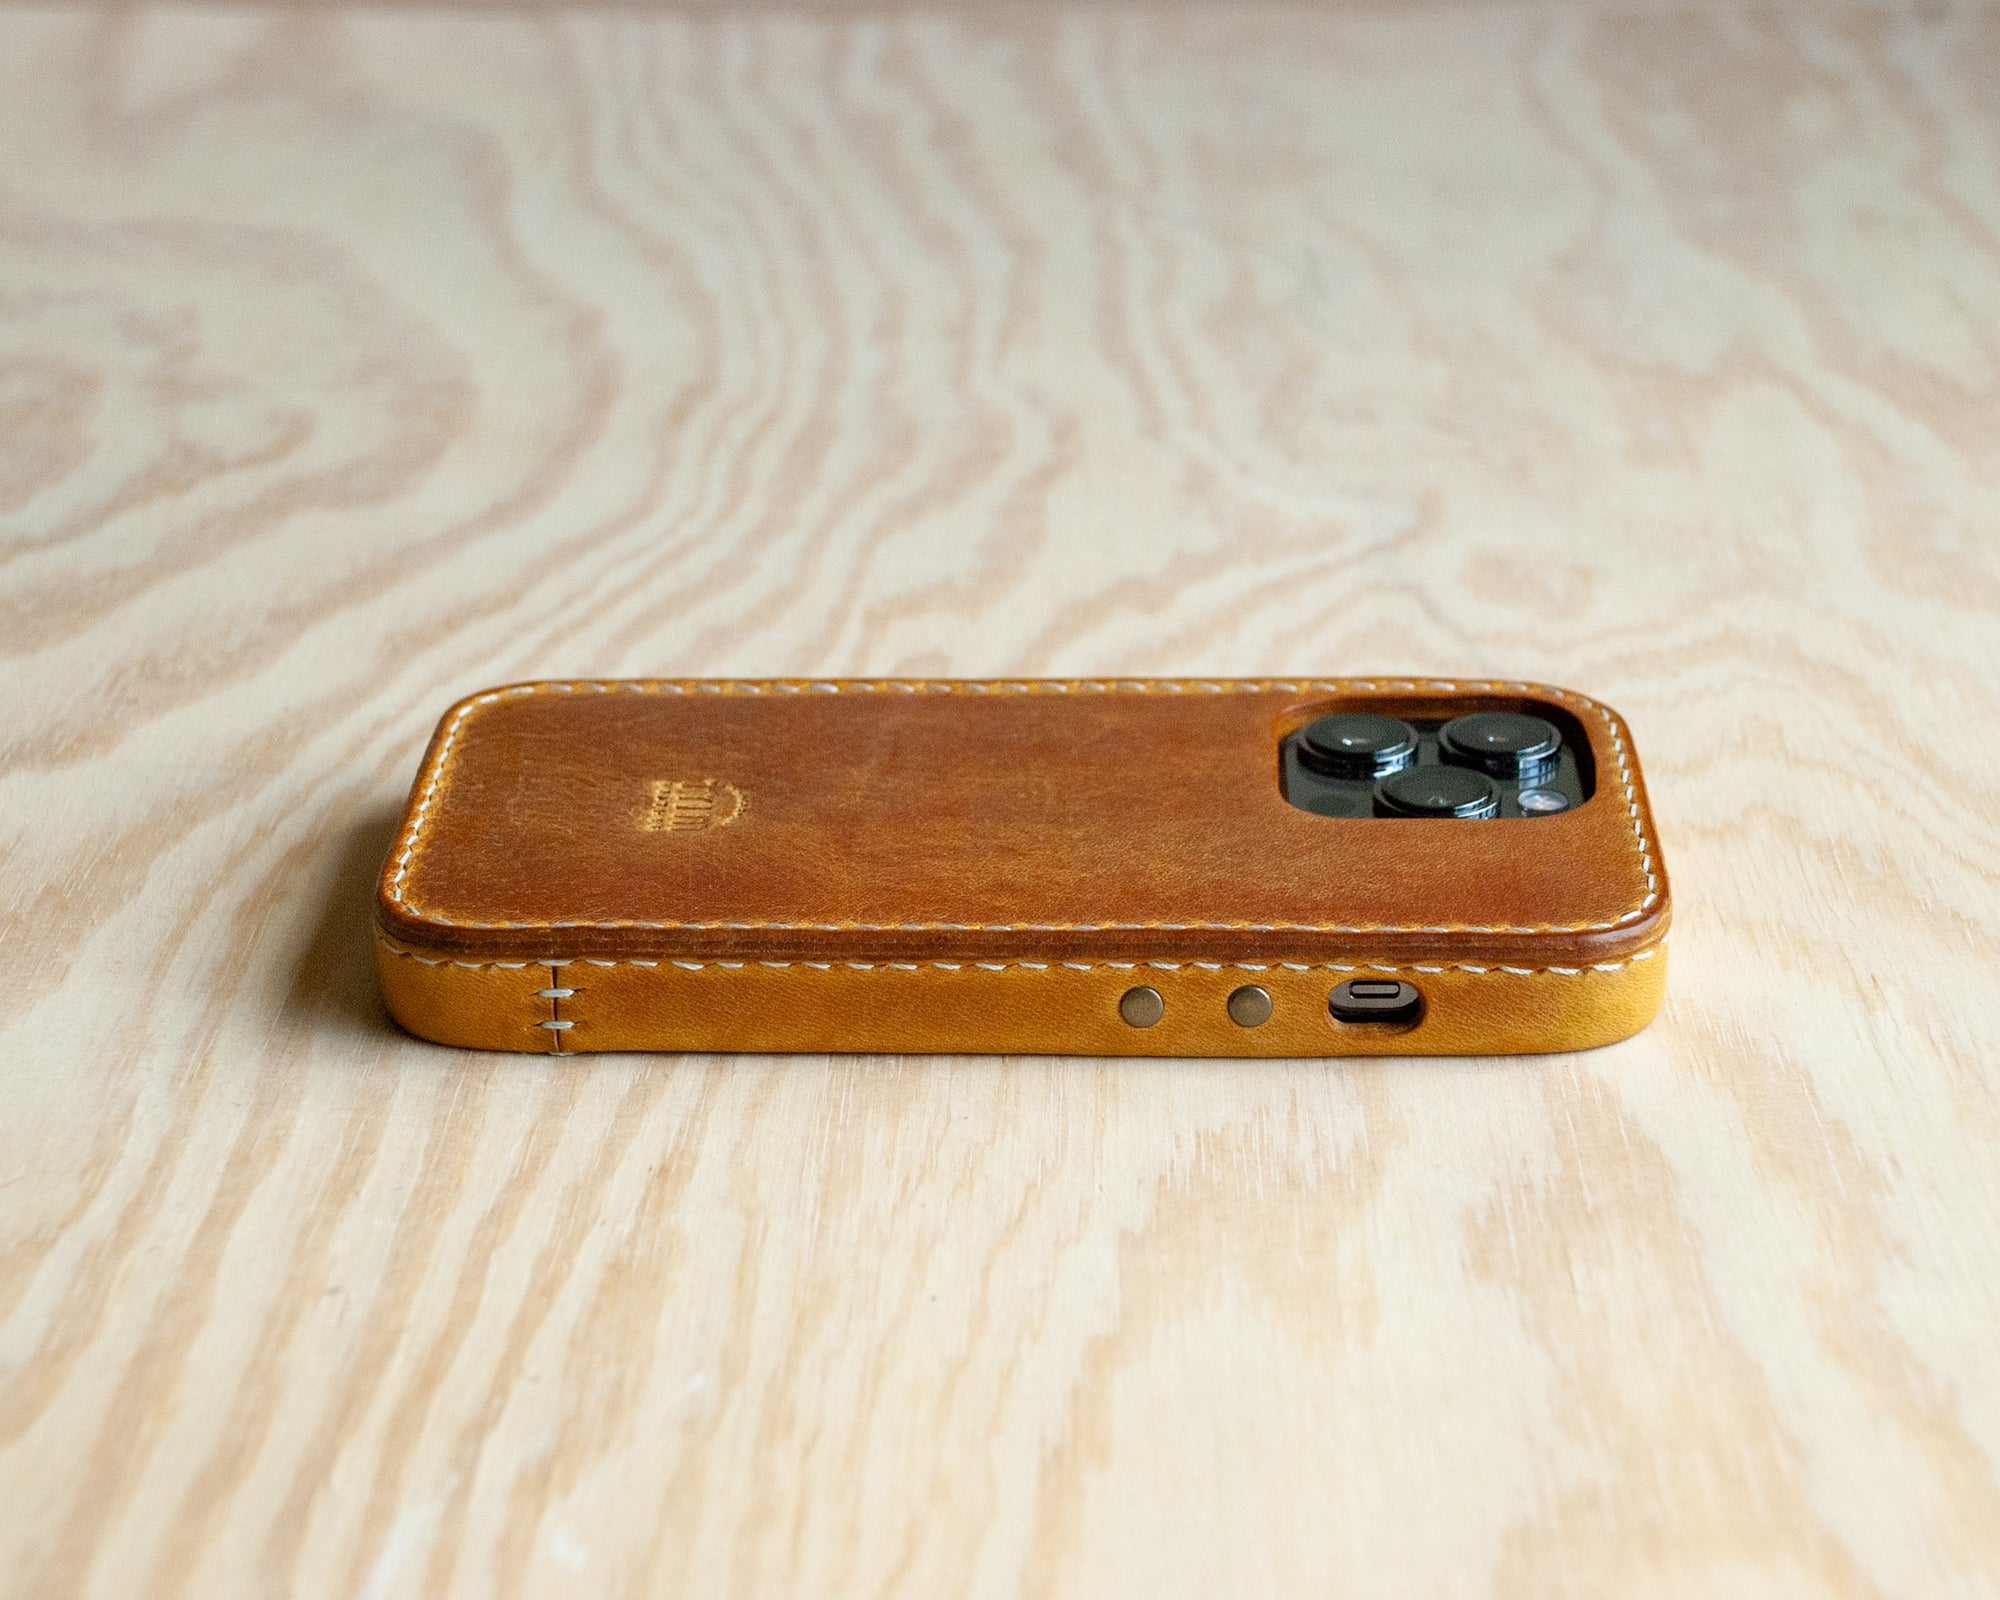 iPhone Leather Case | Handmade | Oil Wax Honey Brown